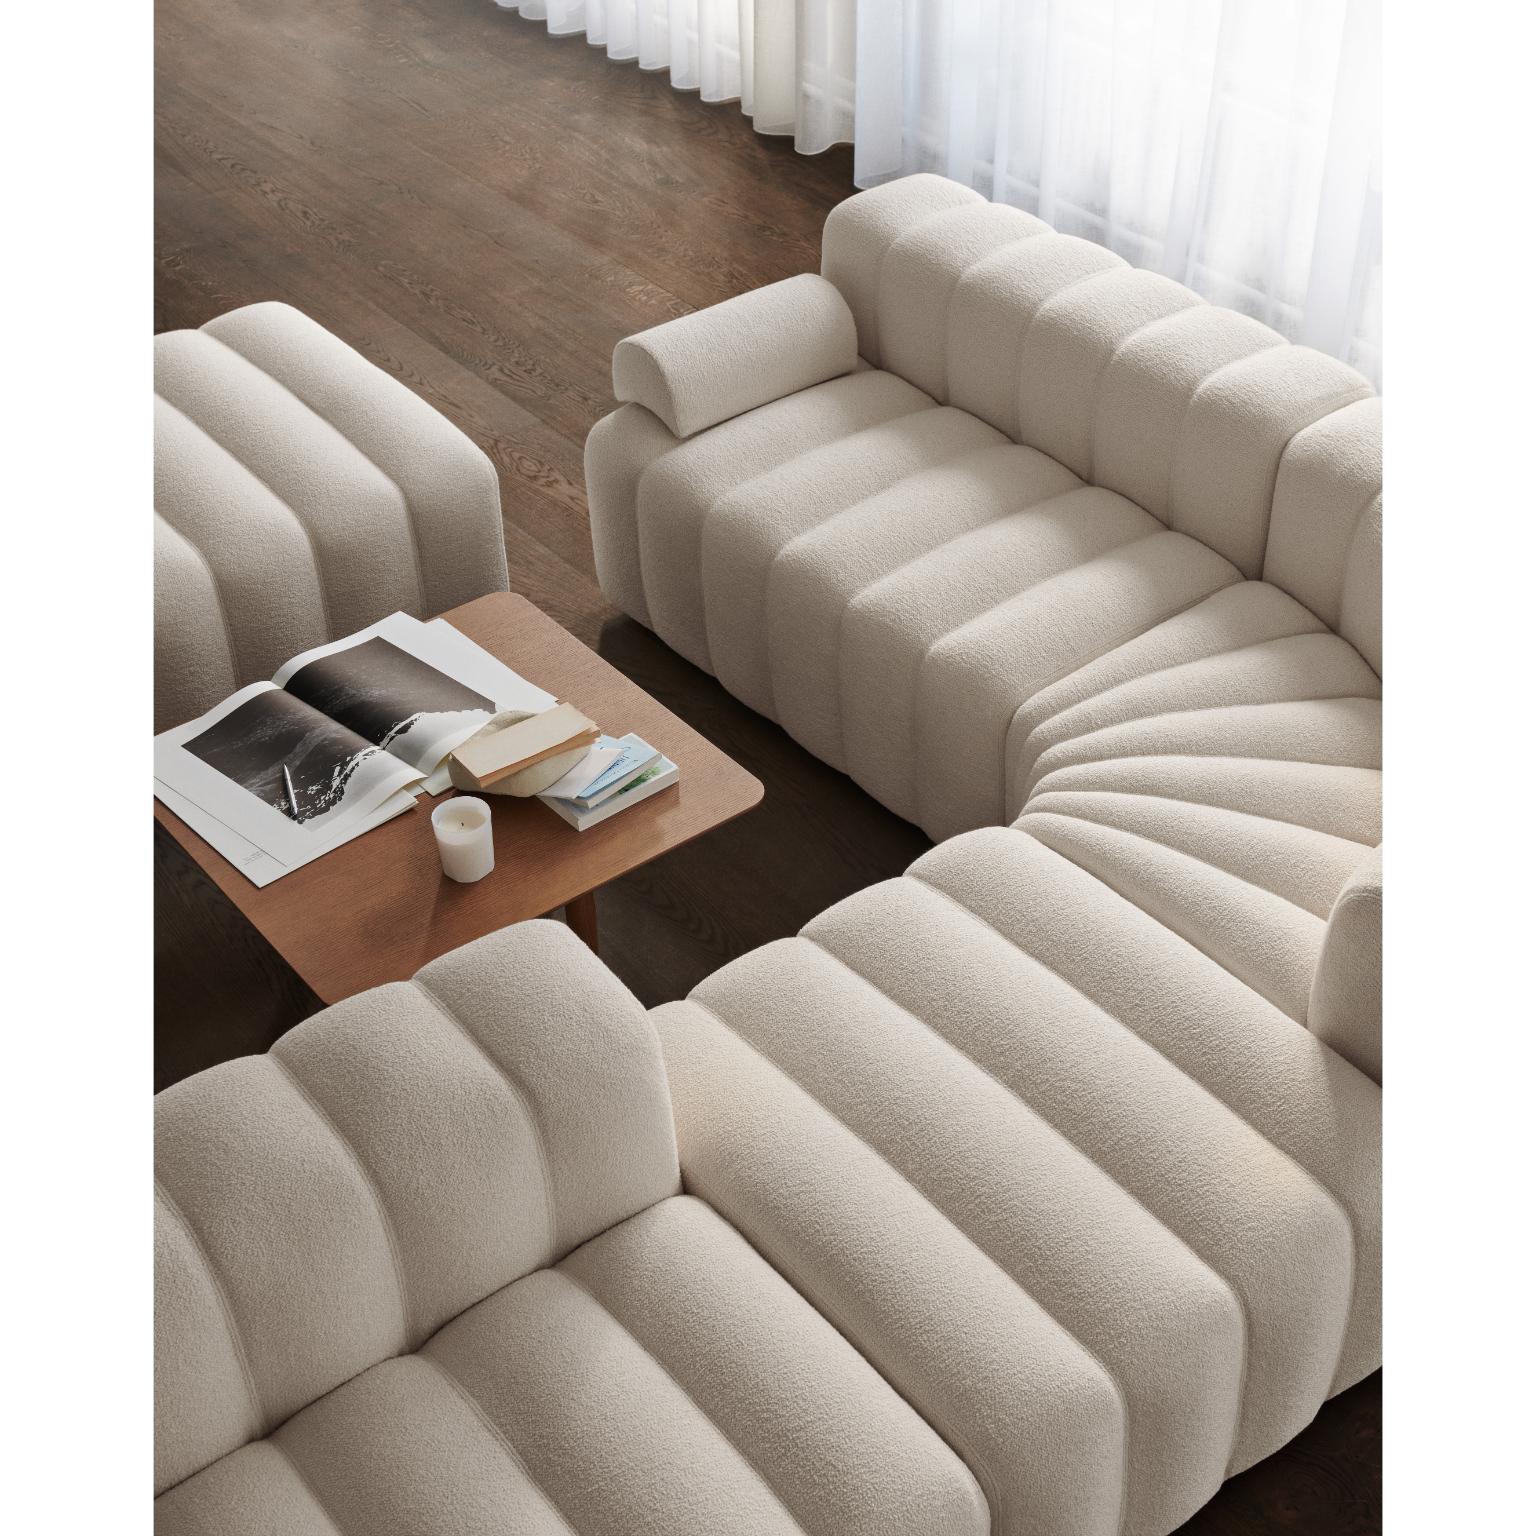 Other Studio Medium Modular Sofa by NORR11 For Sale